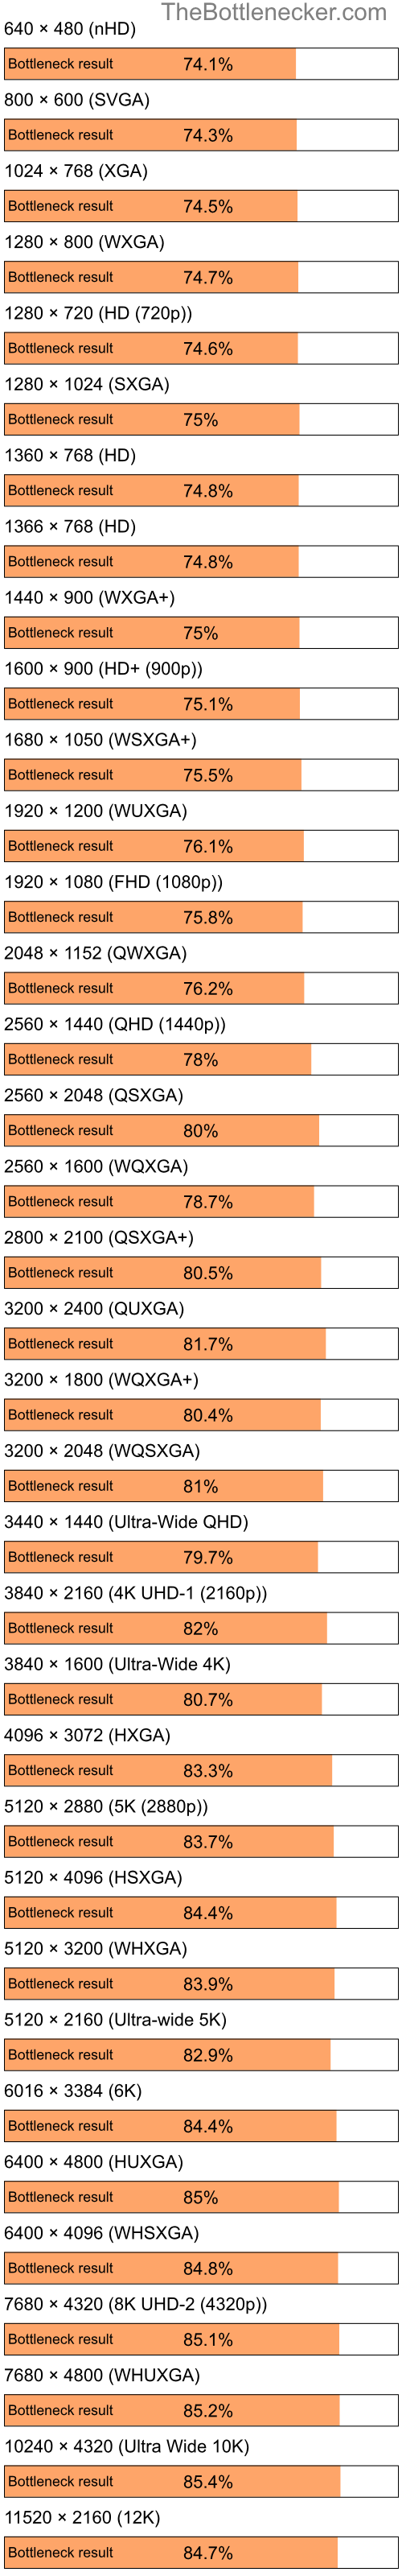 Bottleneck results by resolution for Intel Celeron M and NVIDIA GeForce Go 6600 in Graphic Card Intense Tasks